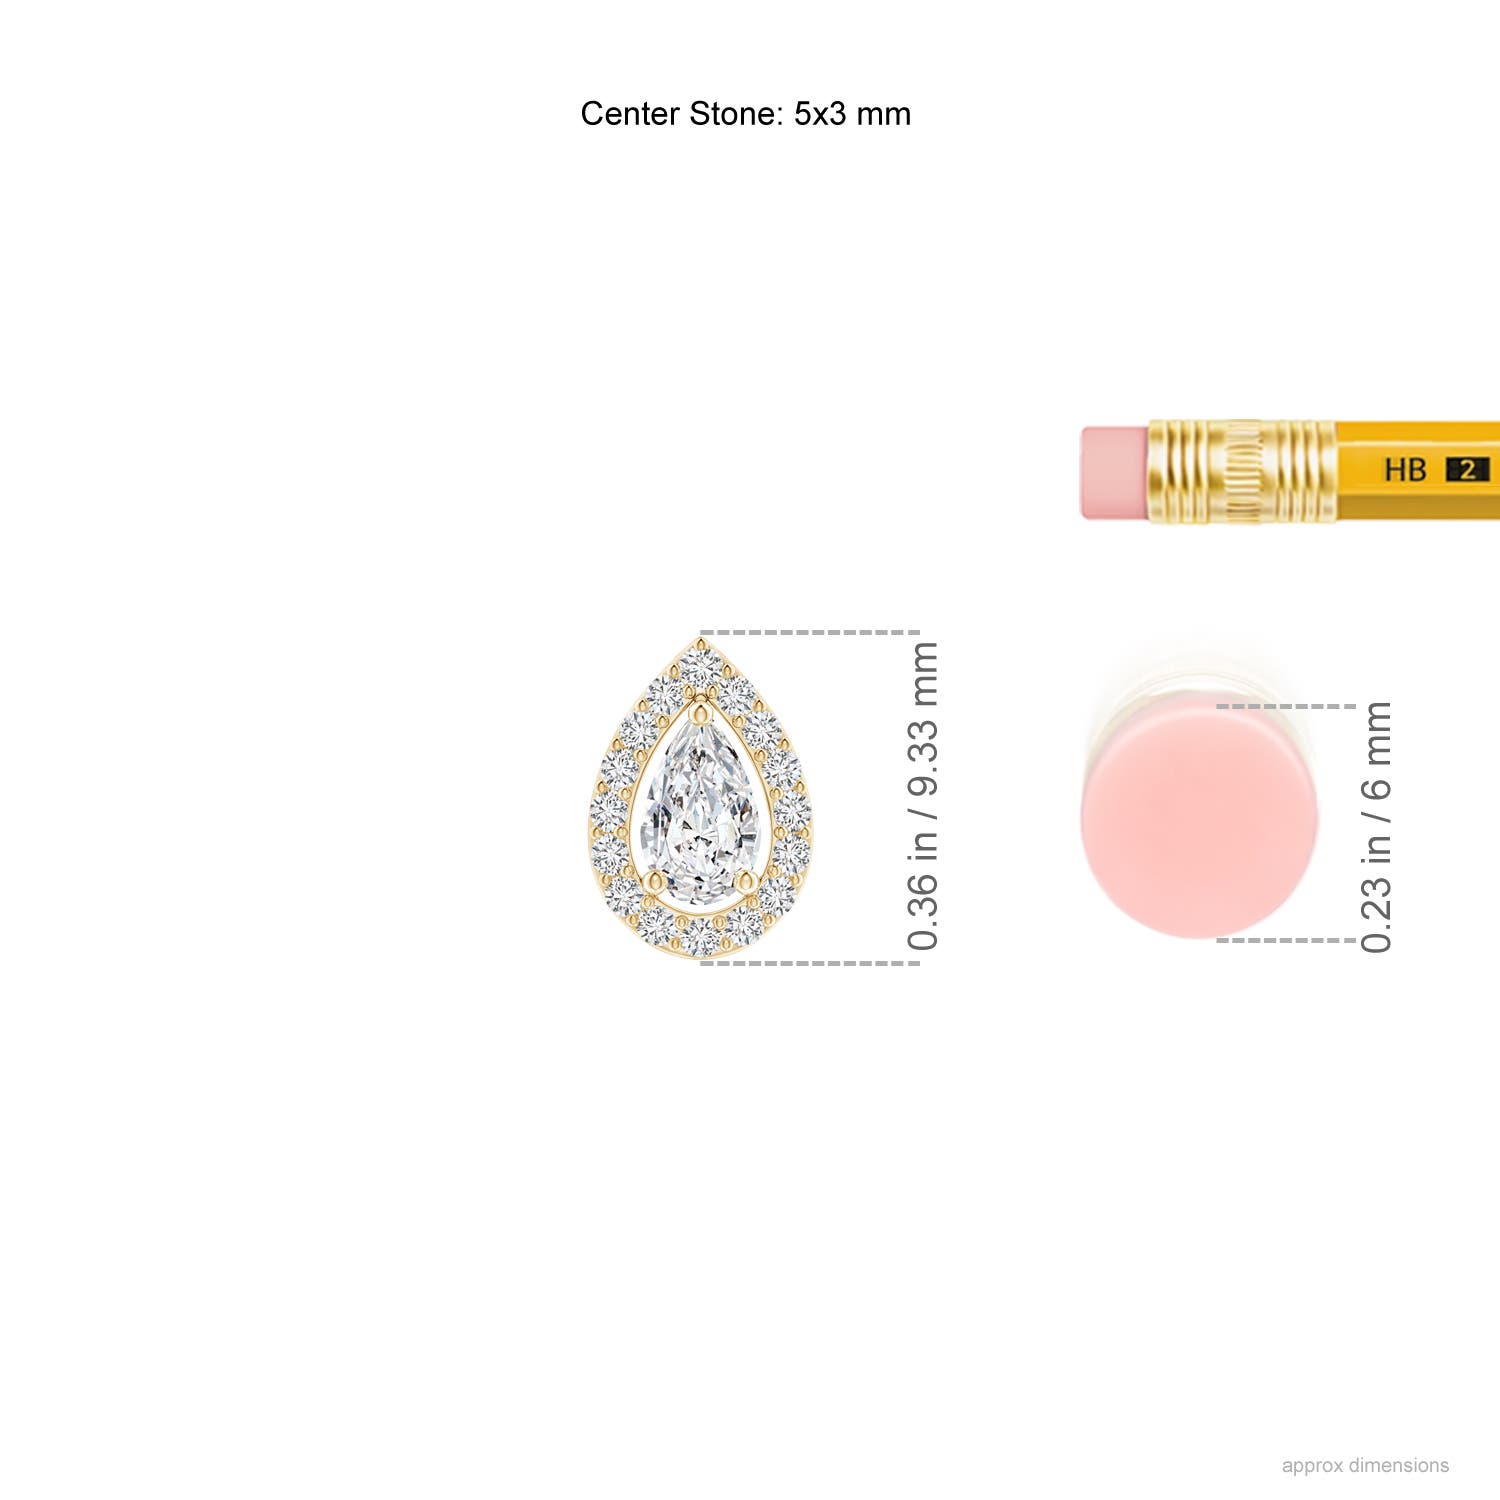 H, SI2 / 0.3 CT / 14 KT Yellow Gold